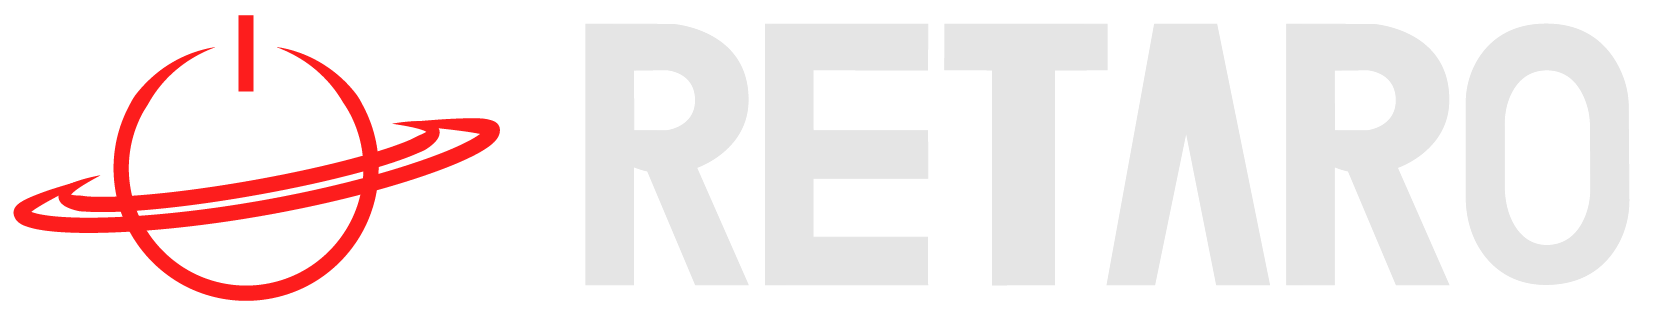 The Retaro Logo with the text on the right in the light version. This image is used for the site header